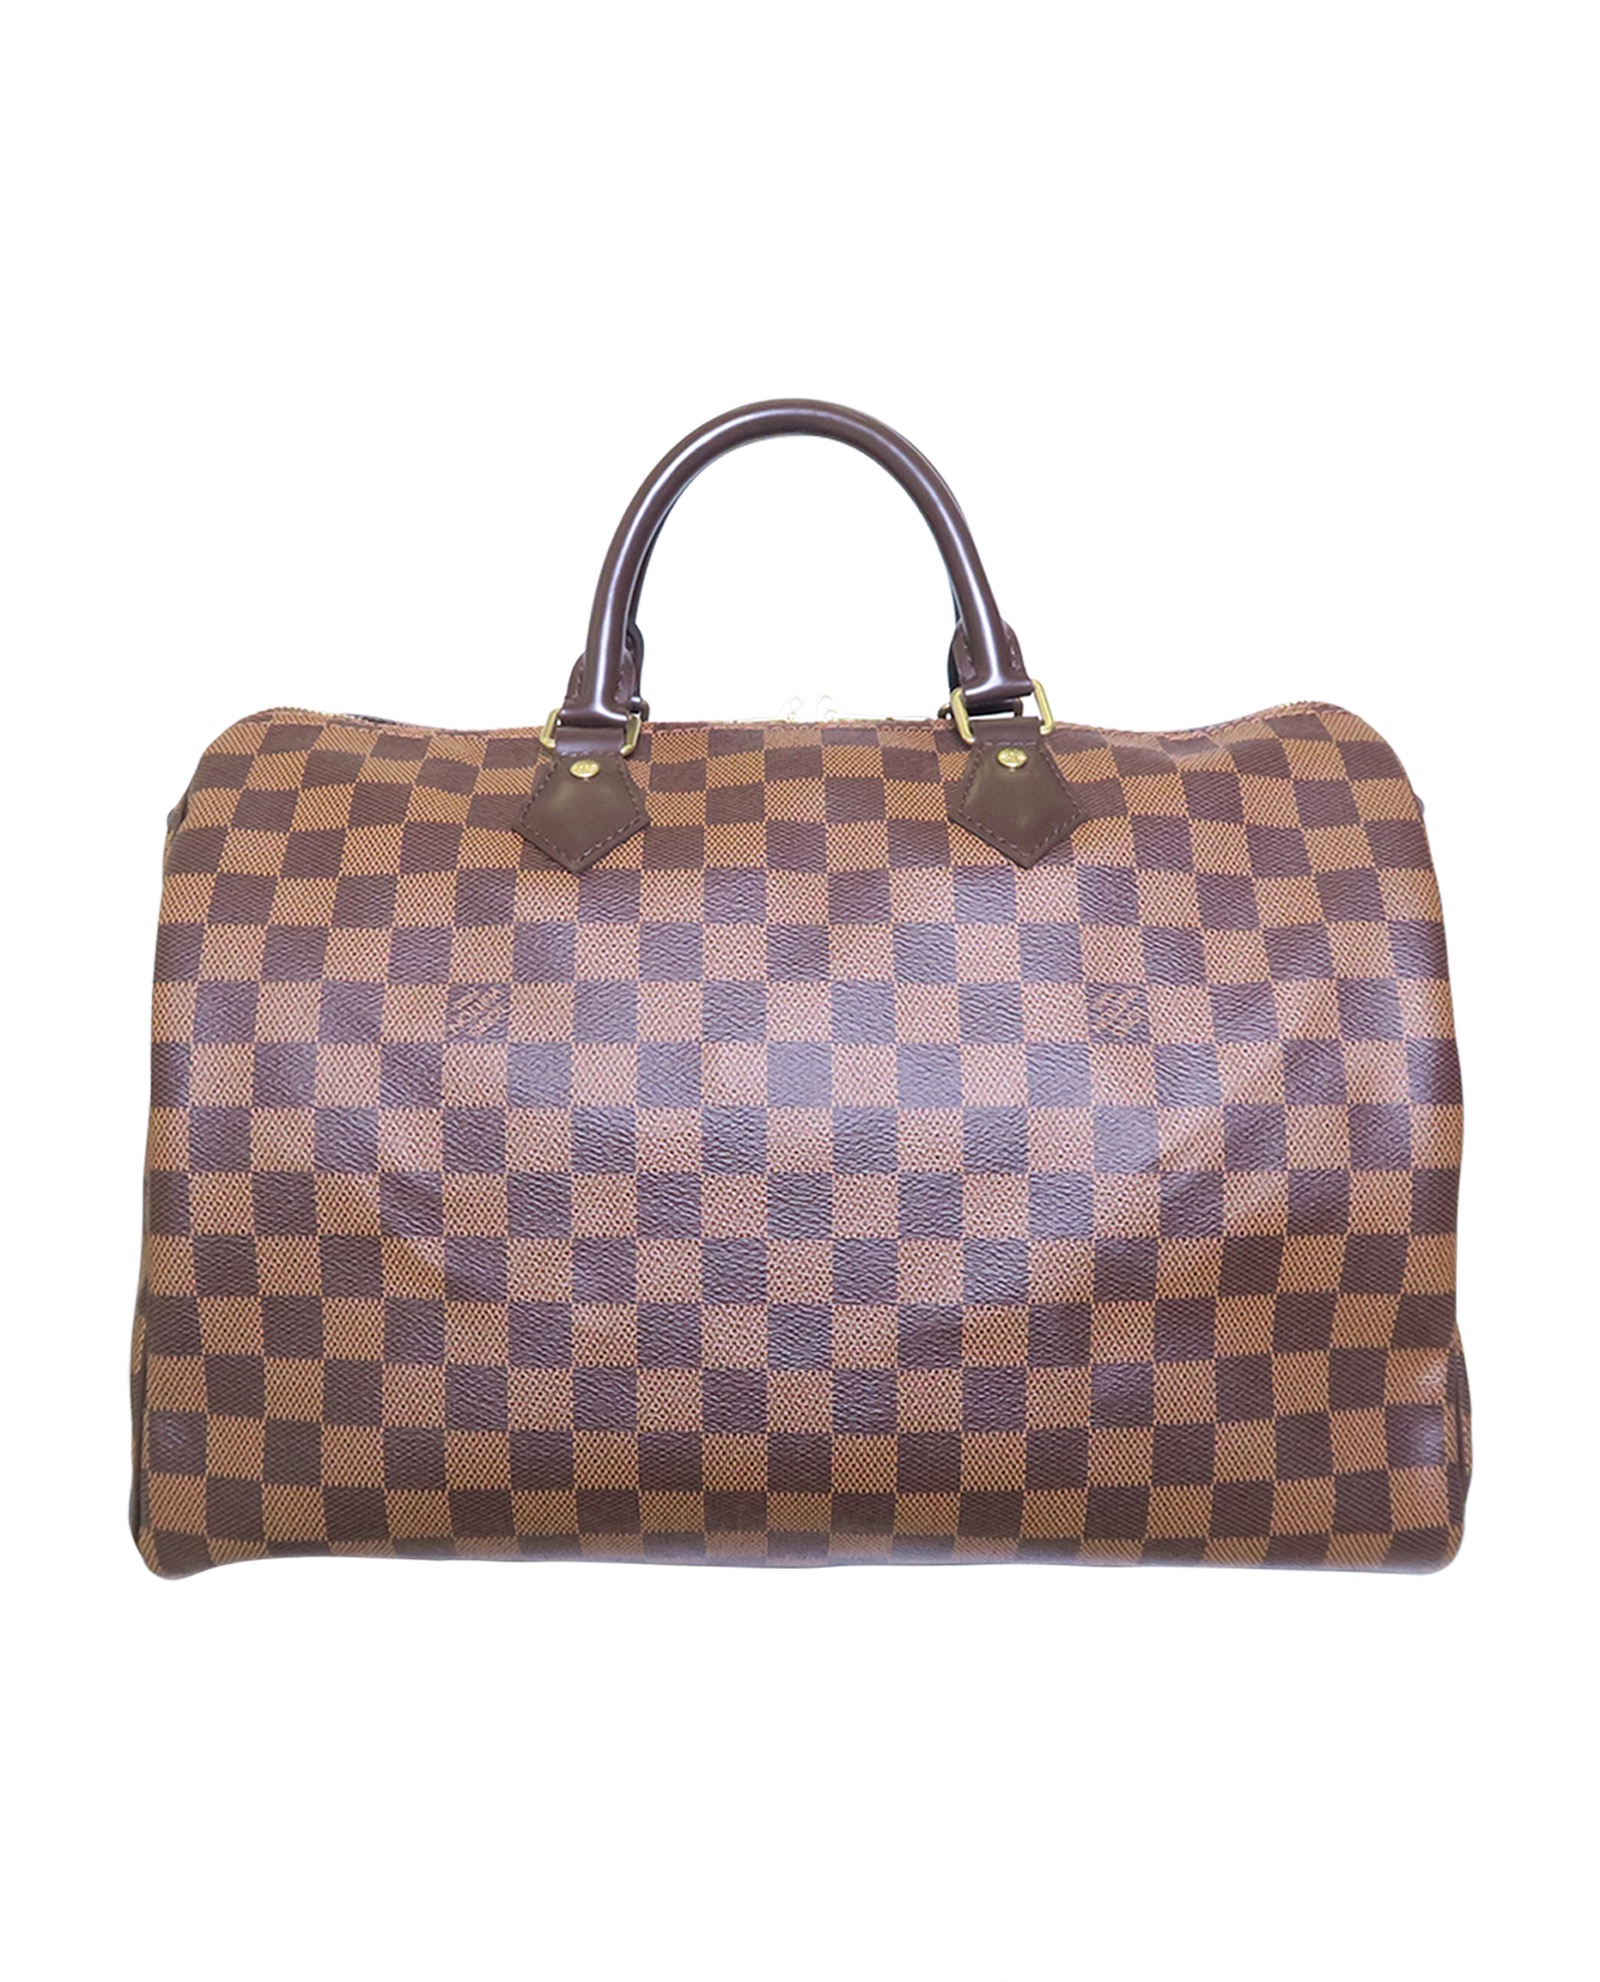 Designer Exchange Ltd - Need some extra cash in time for Christmas? 🎅 Sell  your Louis Vuitton Speedy Bandouliere to us 👜 We are looking for them in  any size, leather and